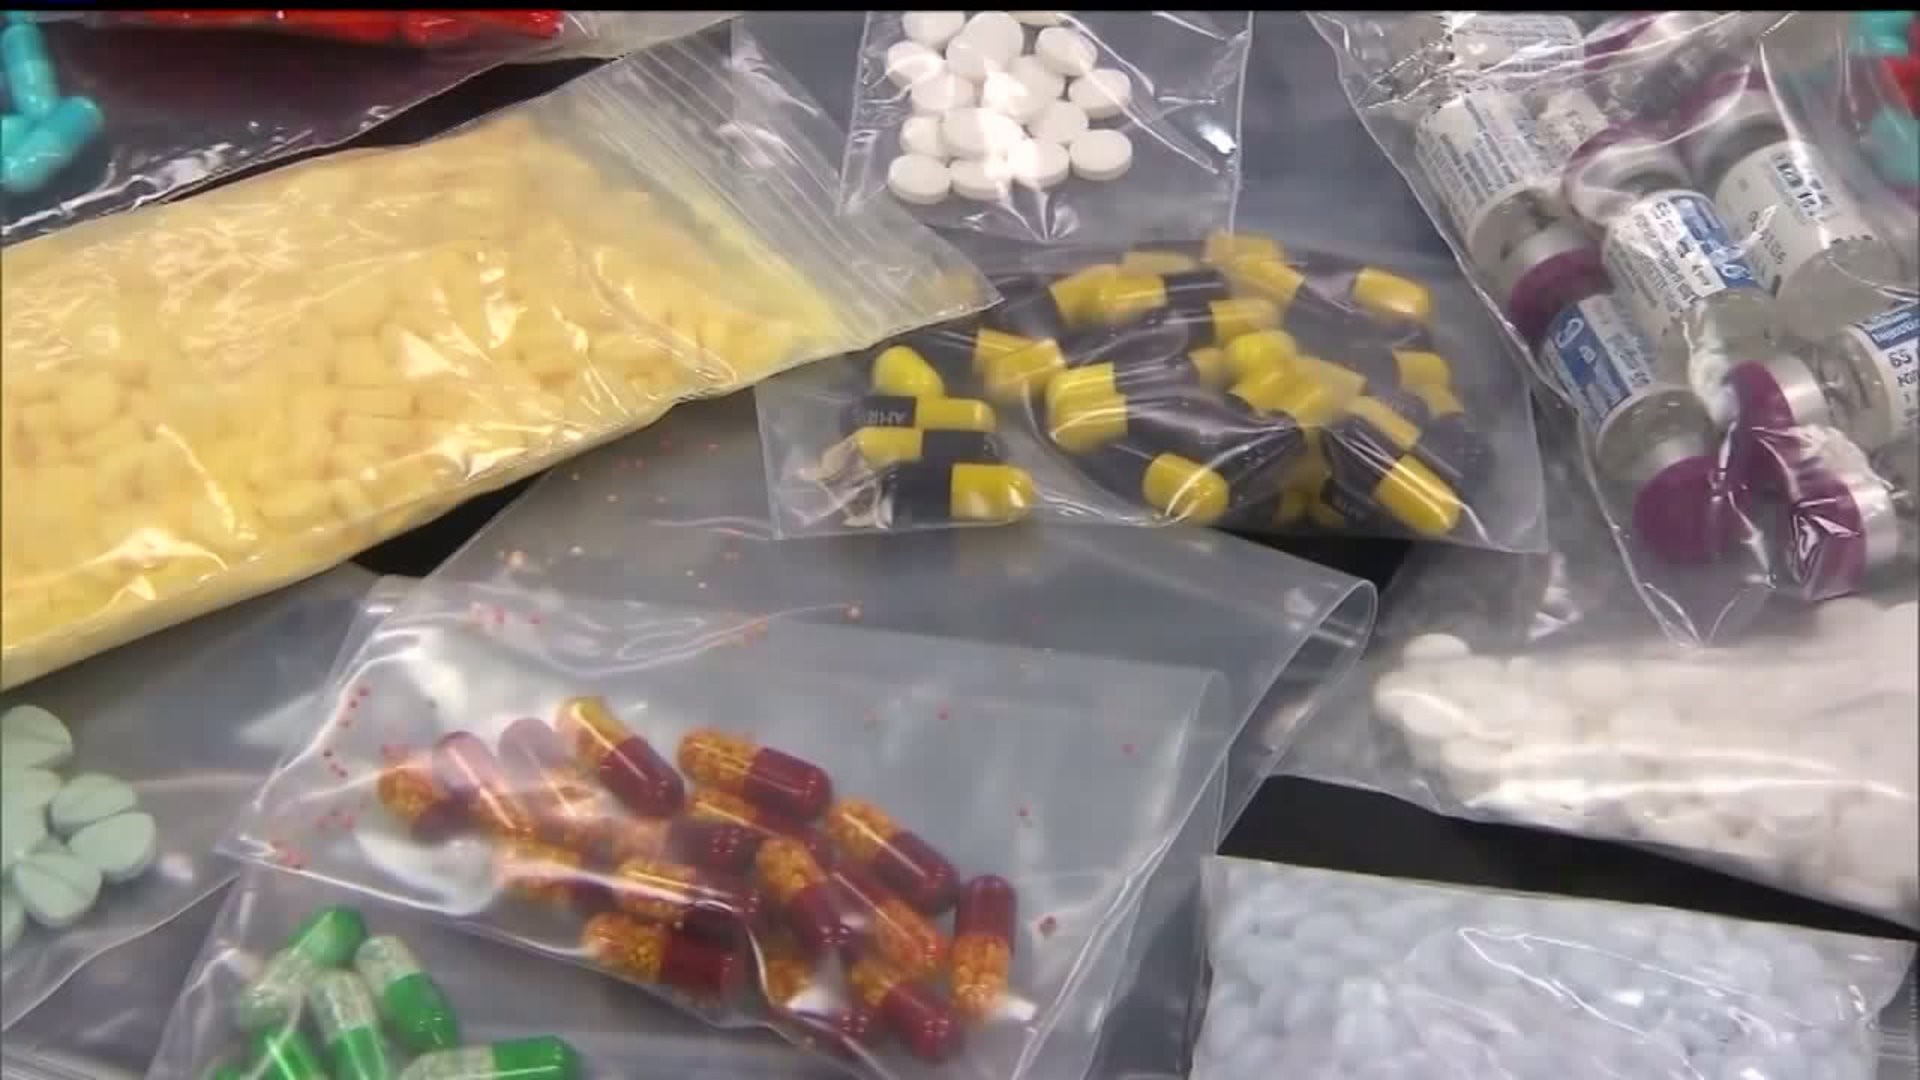 Drug overdose deaths spike in Dauphin County